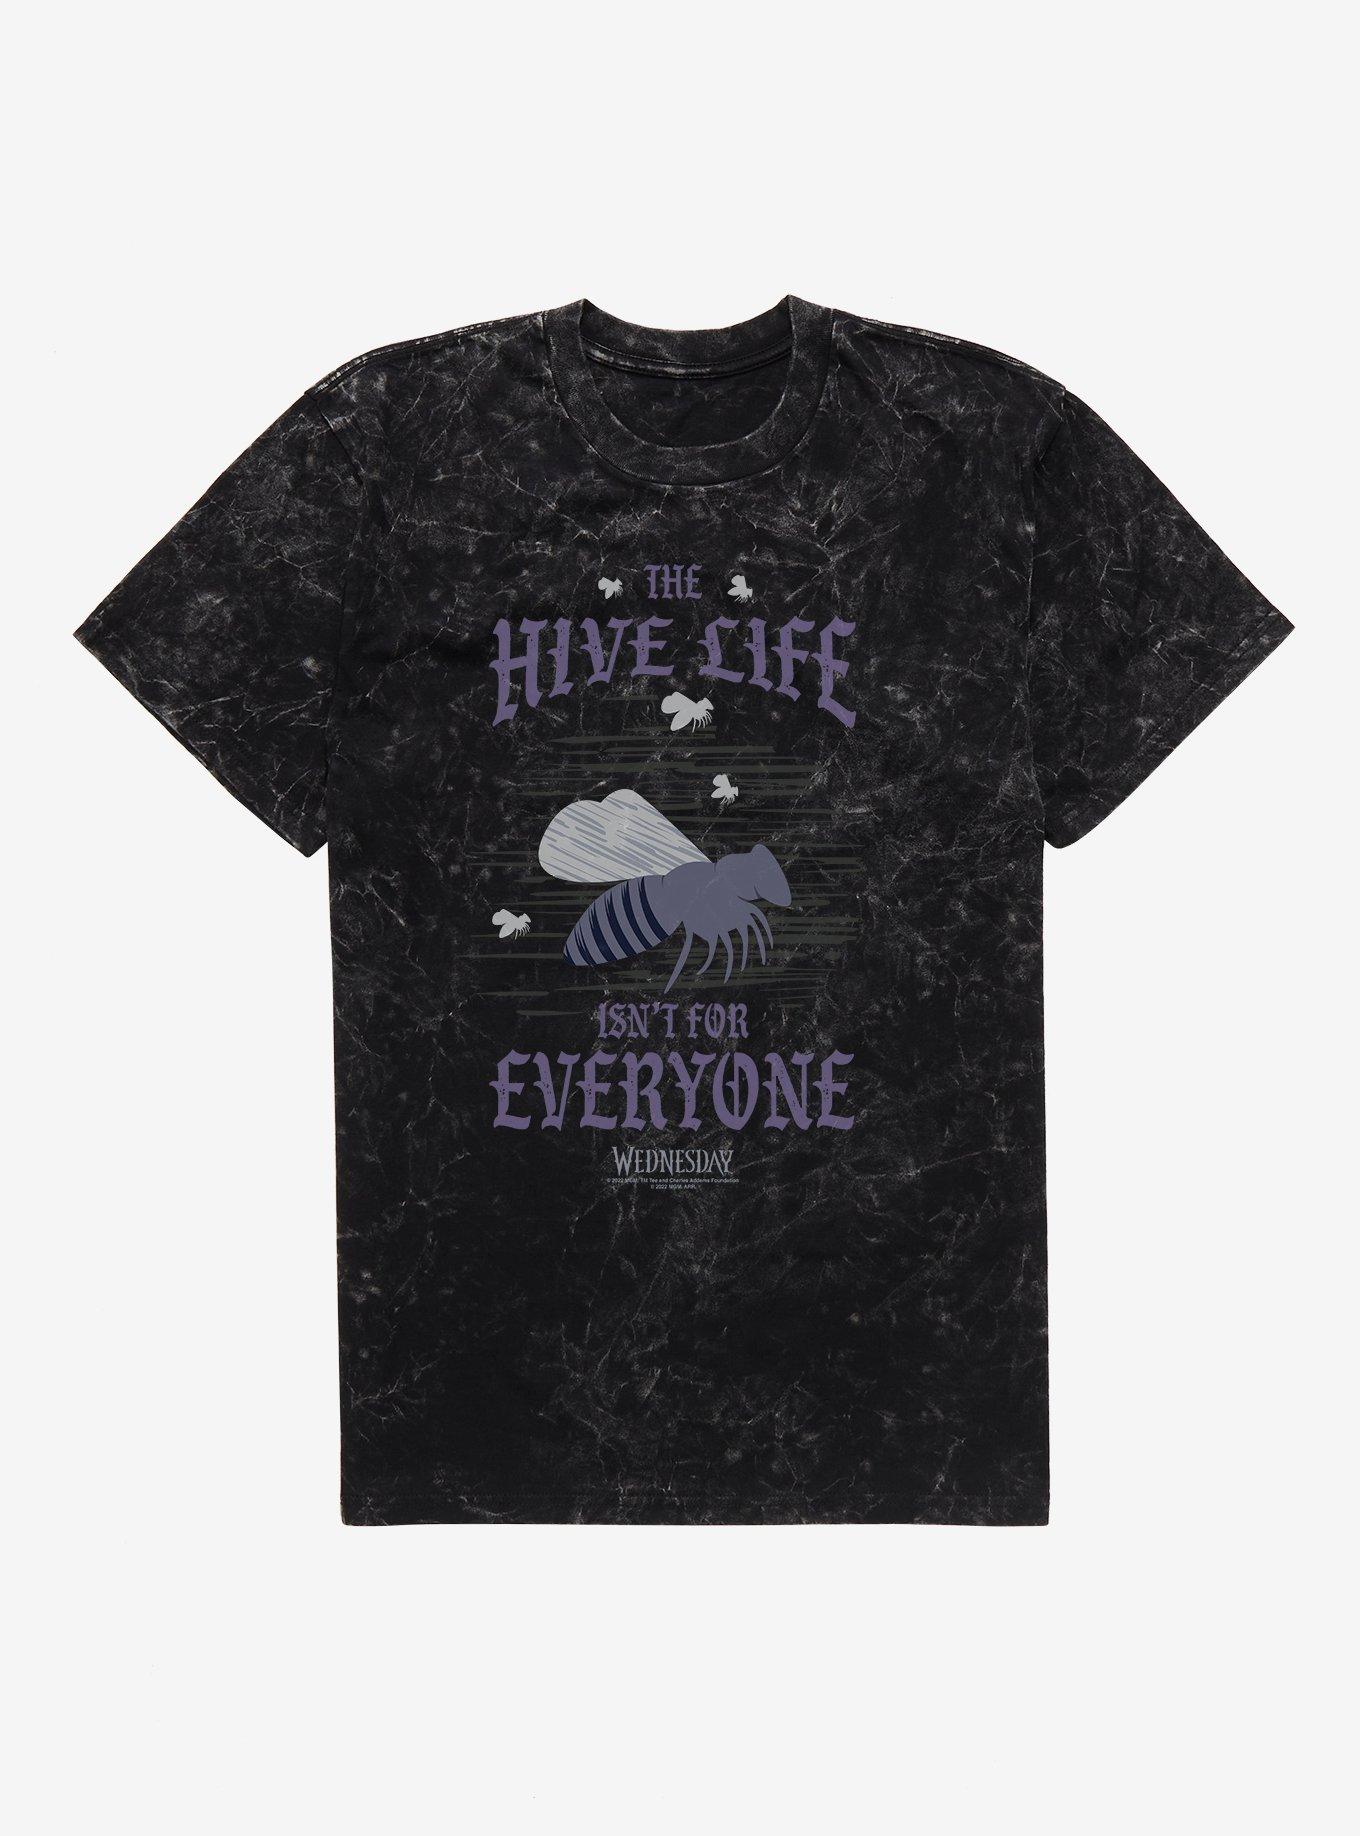 Wednesday The Hive Life Isn't For Everyone Mineral Wash T-Shirt, BLACK, hi-res